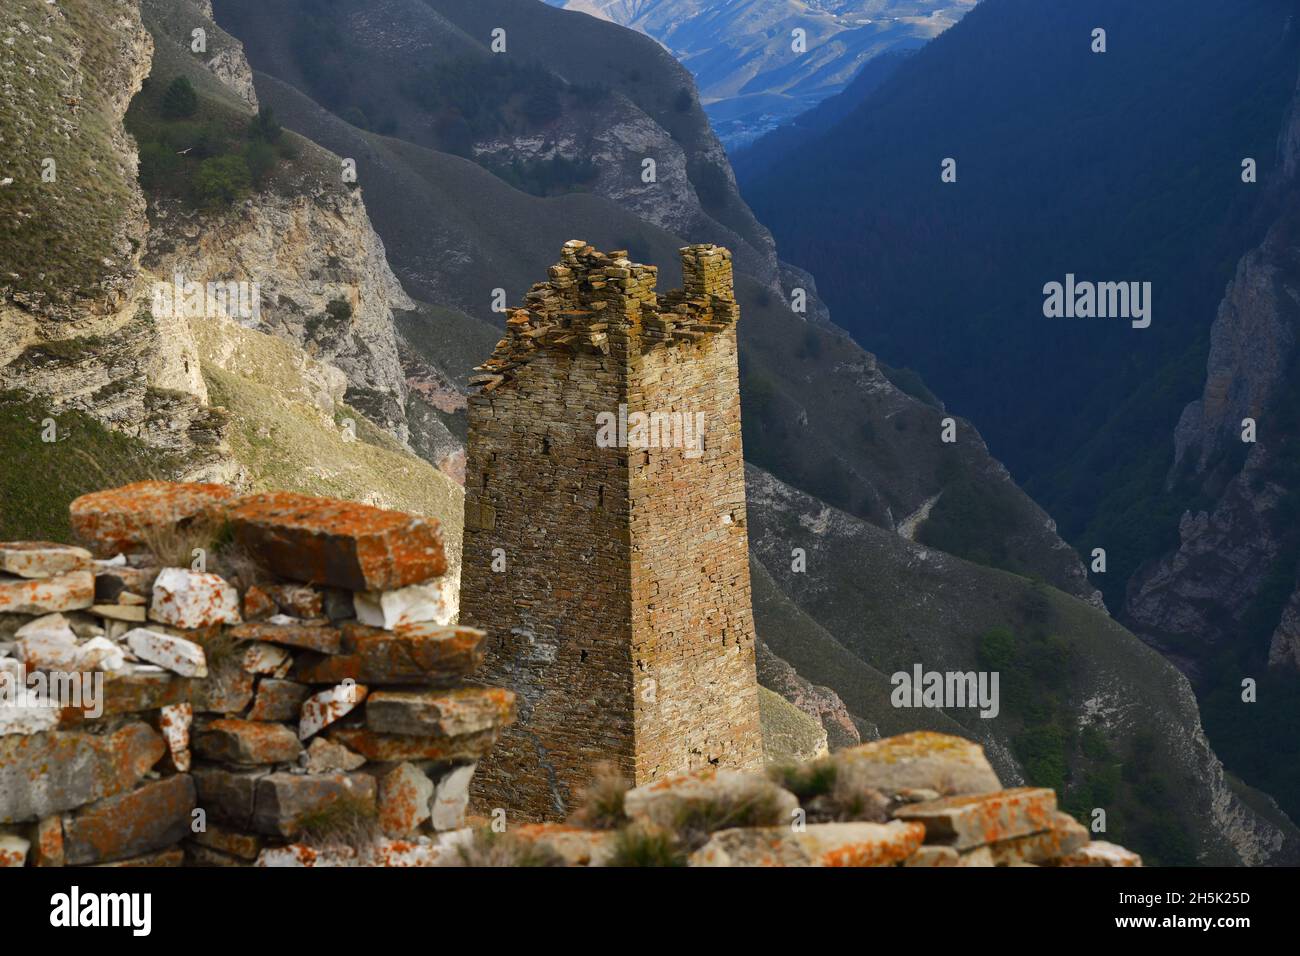 Medieval ruins building of the Harcaroy Battle Tower. Kharkaroi village, Vedensky district, Chechen Republic. Russia. Selective focus Stock Photo